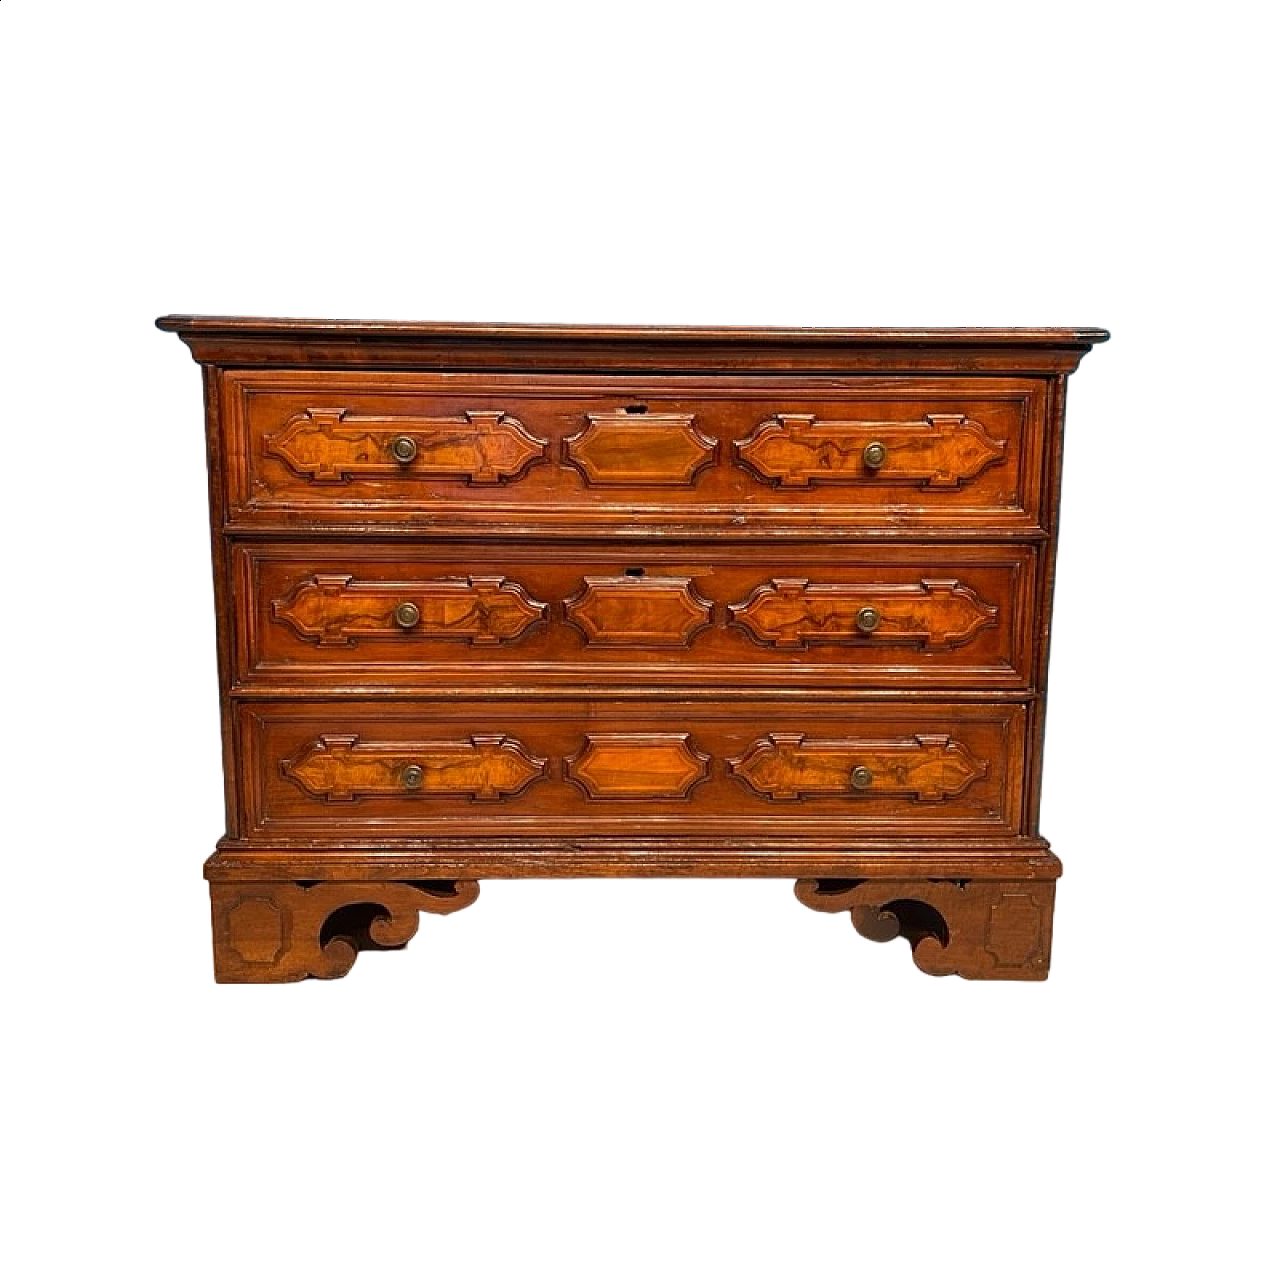 Lombardy chest of drawers in cherry wood, late 18th century 12